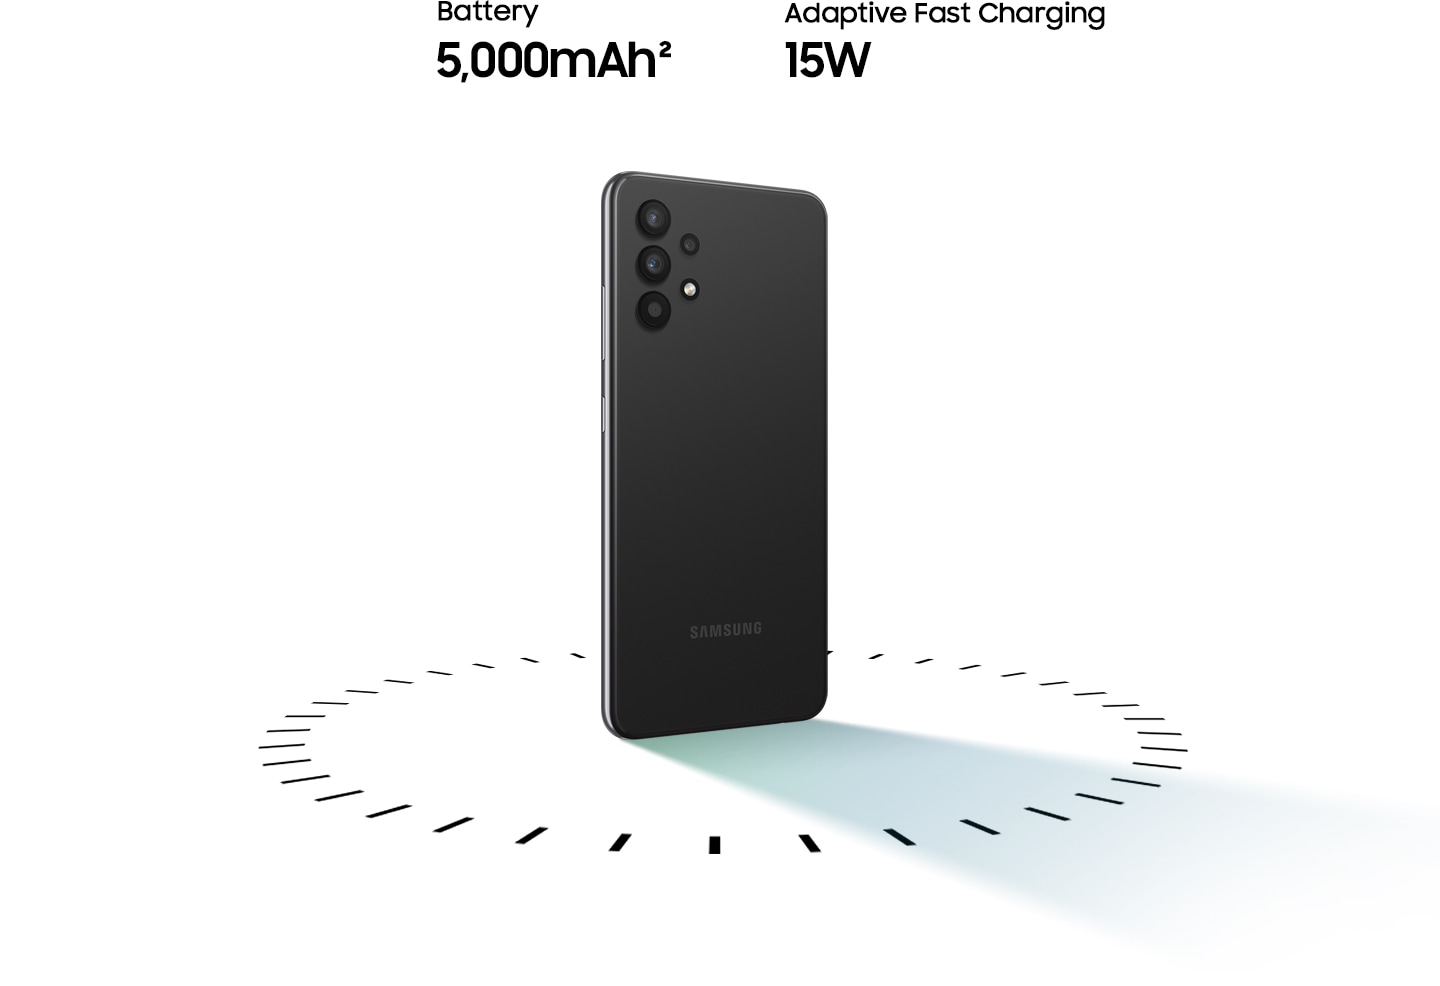 Galaxy A32 stands up, surrounded by circular dots, with the text of 5,000mAh Battery and 15W Adaptive Fast charging.